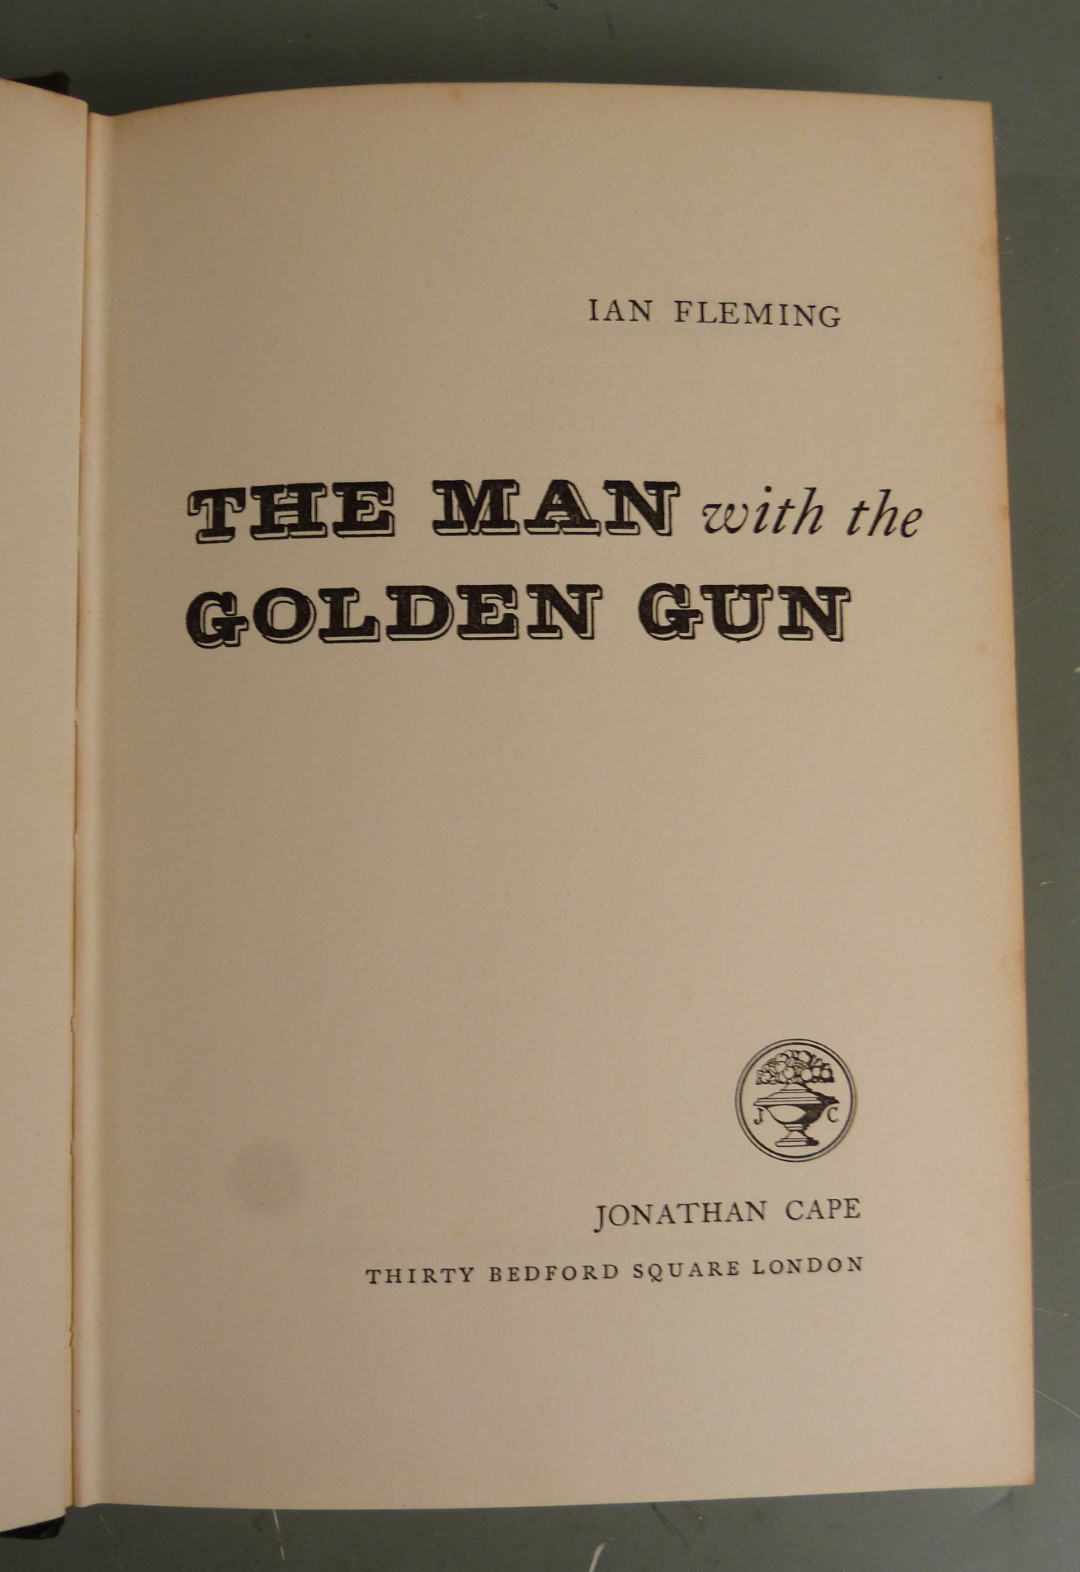 [James Bond] The Man with the Golden Gun by Ian Fleming published Jonathan Cape 1965 first edition - Image 2 of 4